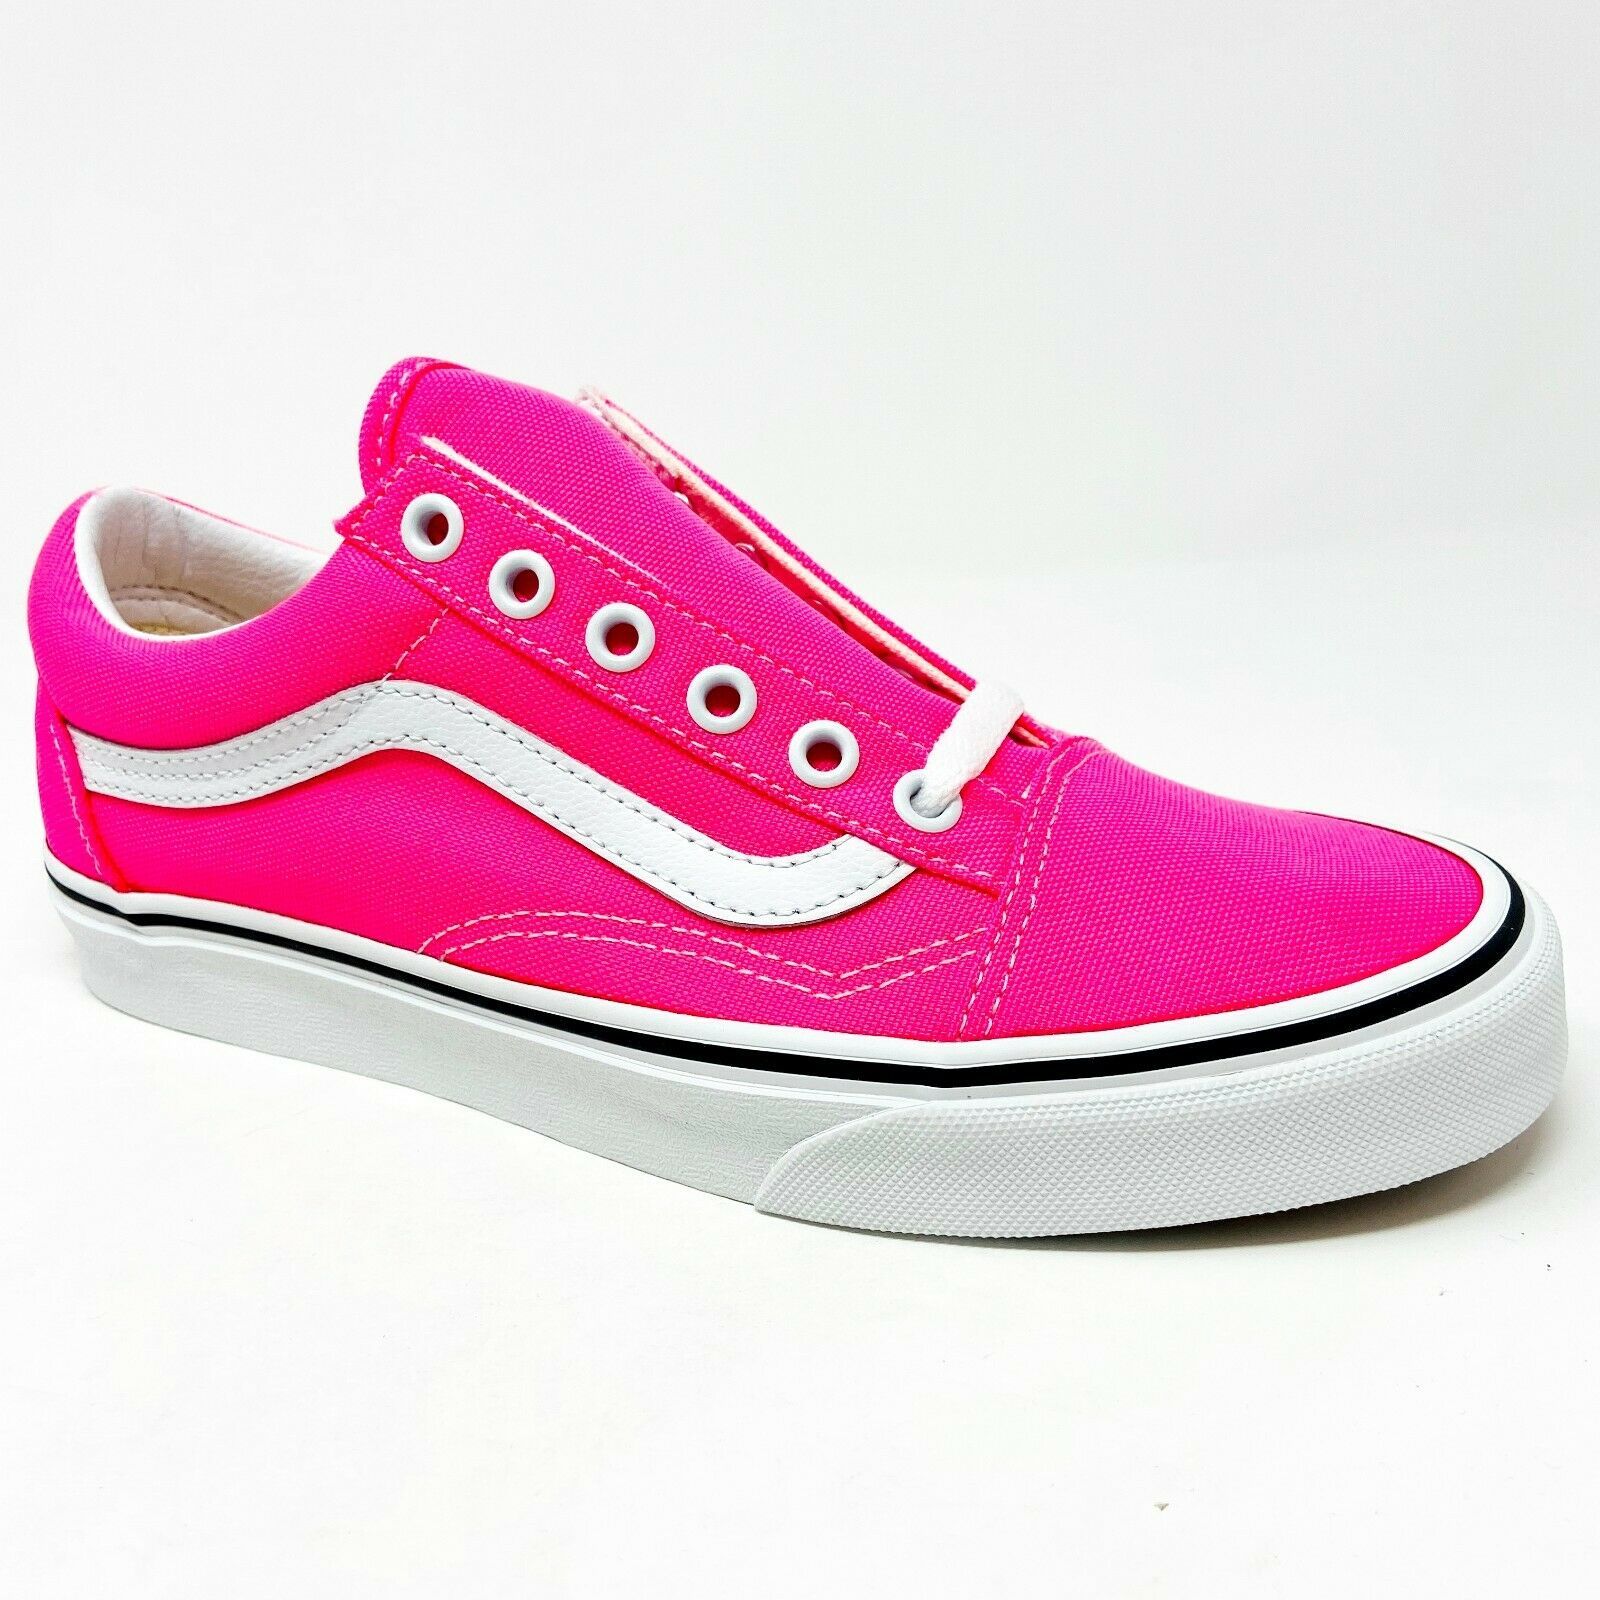 Primary image for Vans Old Skool (Neon) Knockout Pink True White Womens Classic Sneakers